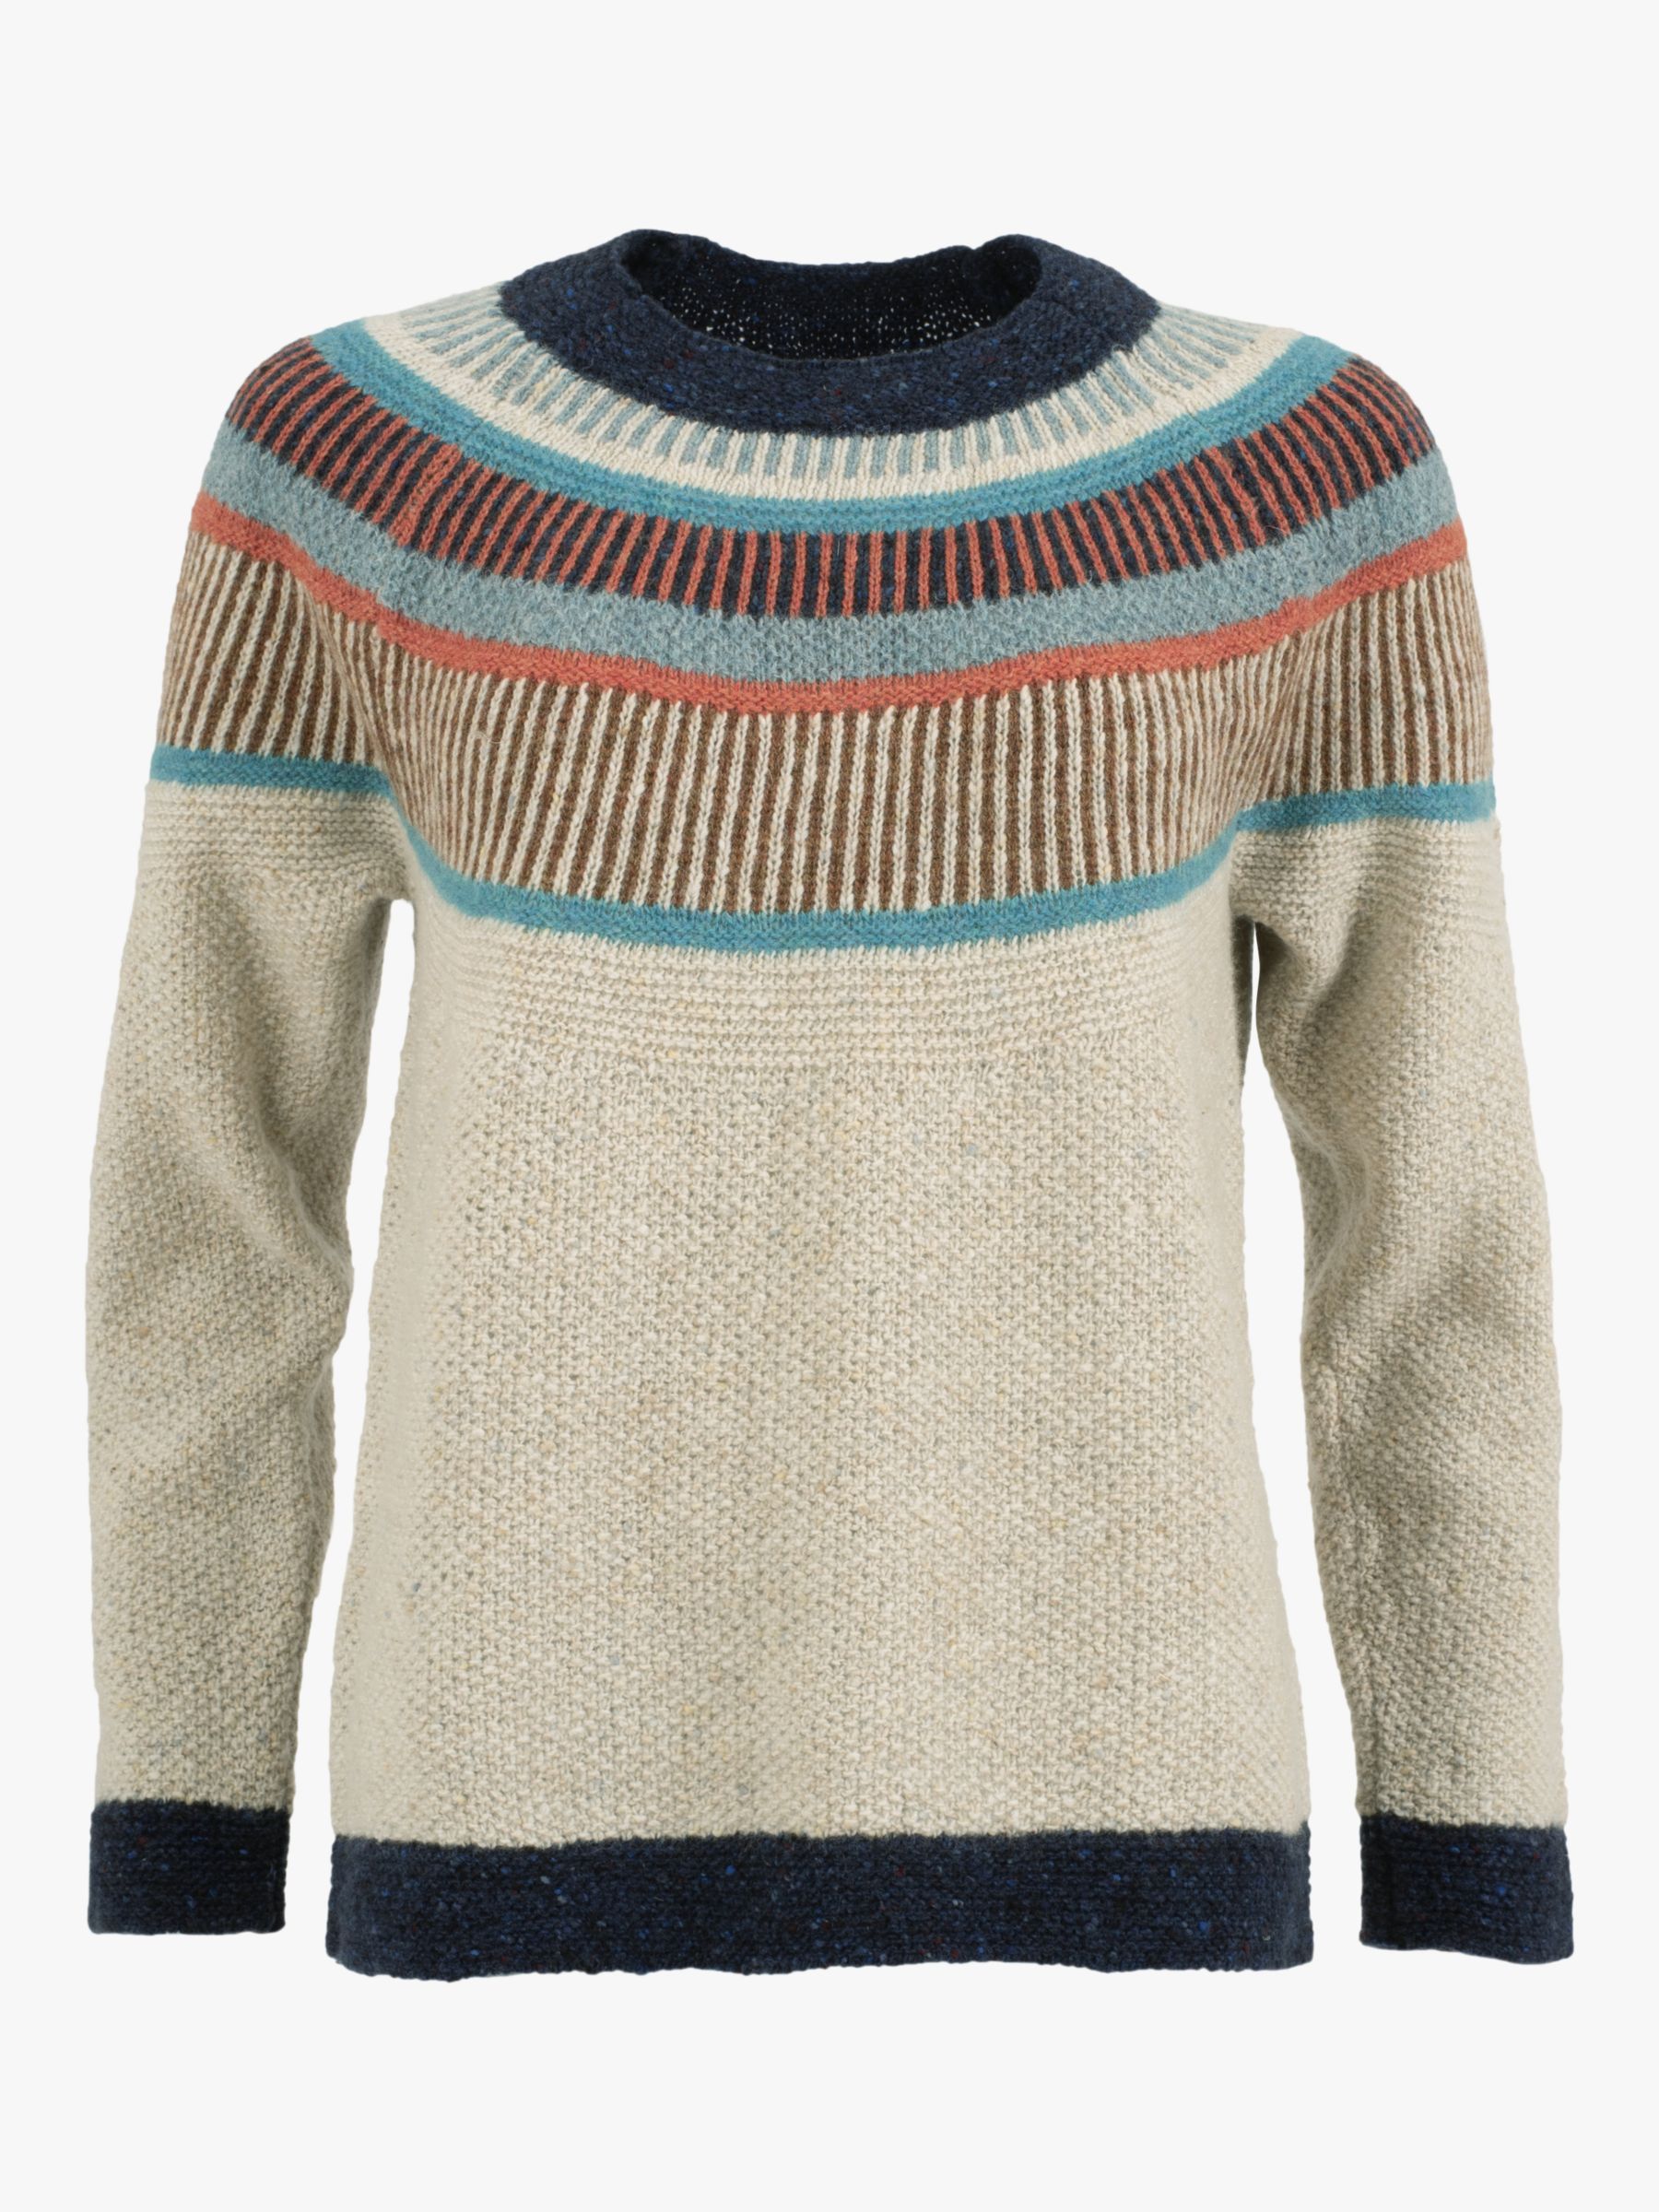 Celtic & Co. Statement Donegal Jumper, Oatmeal at John Lewis & Partners